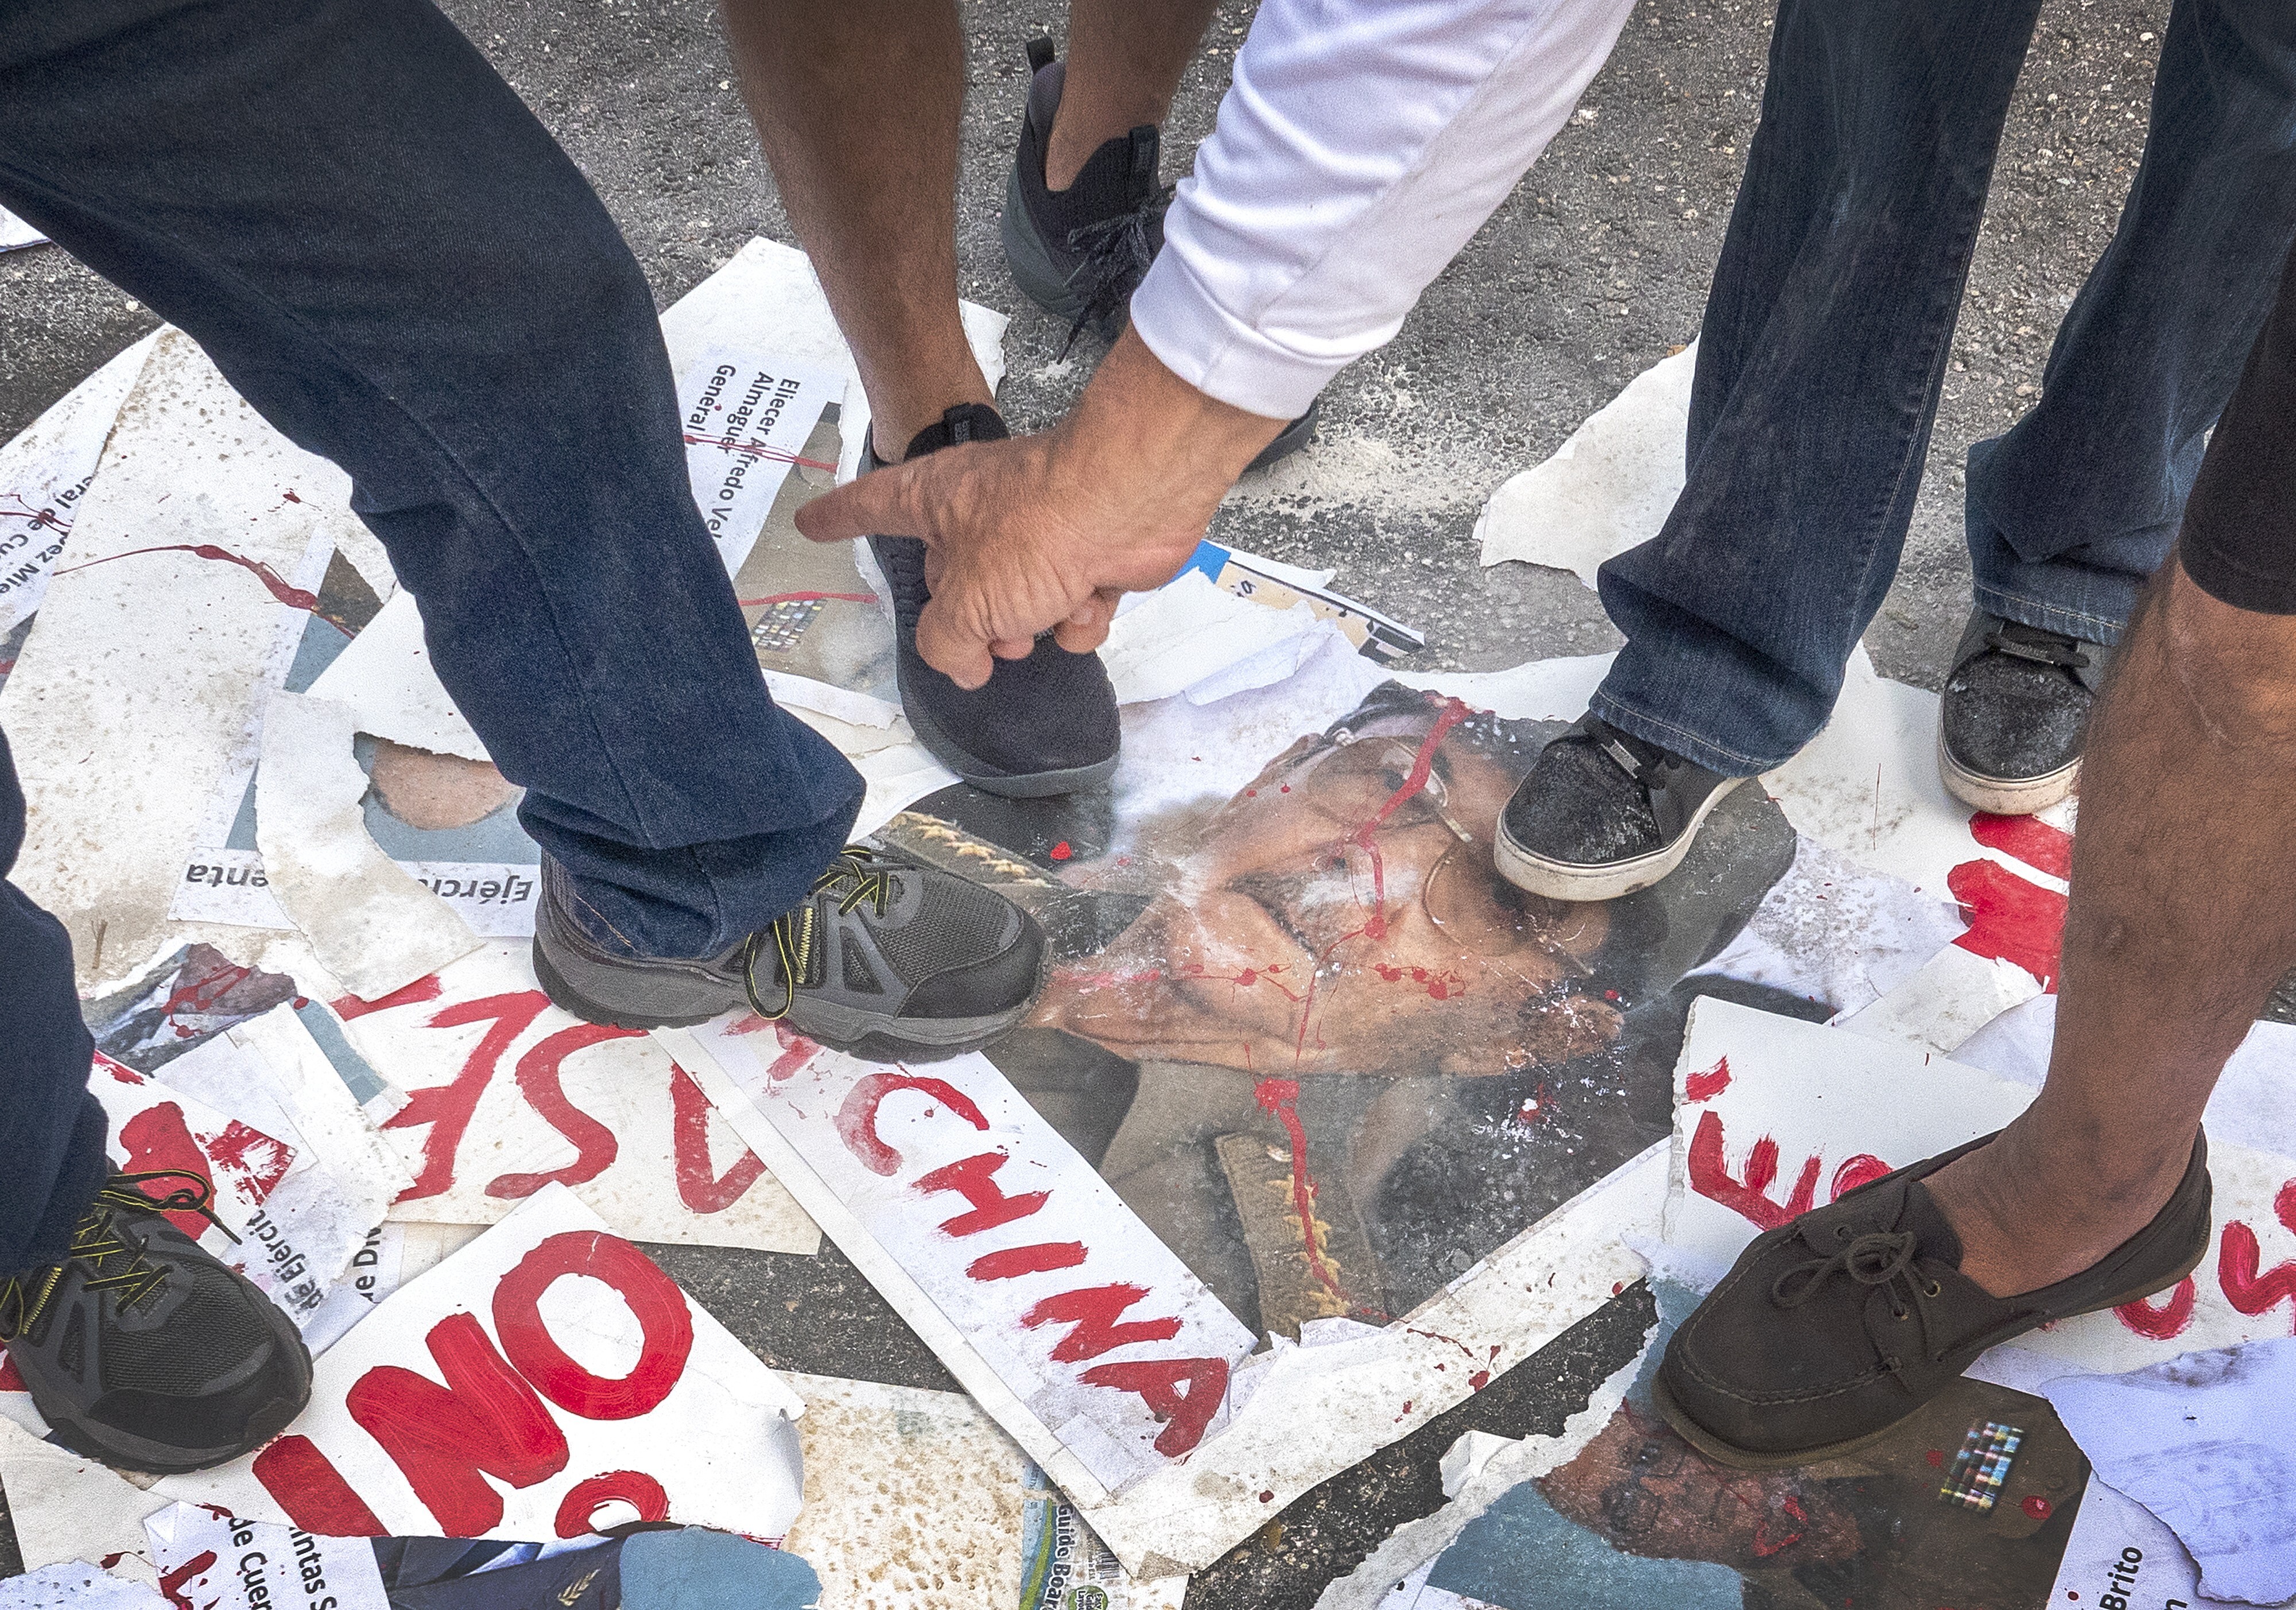 Cuban exiles and freedom activists rip photos of former Cuban president Raul Castro during a demonstration in Miami, Florida. Photo: EPA